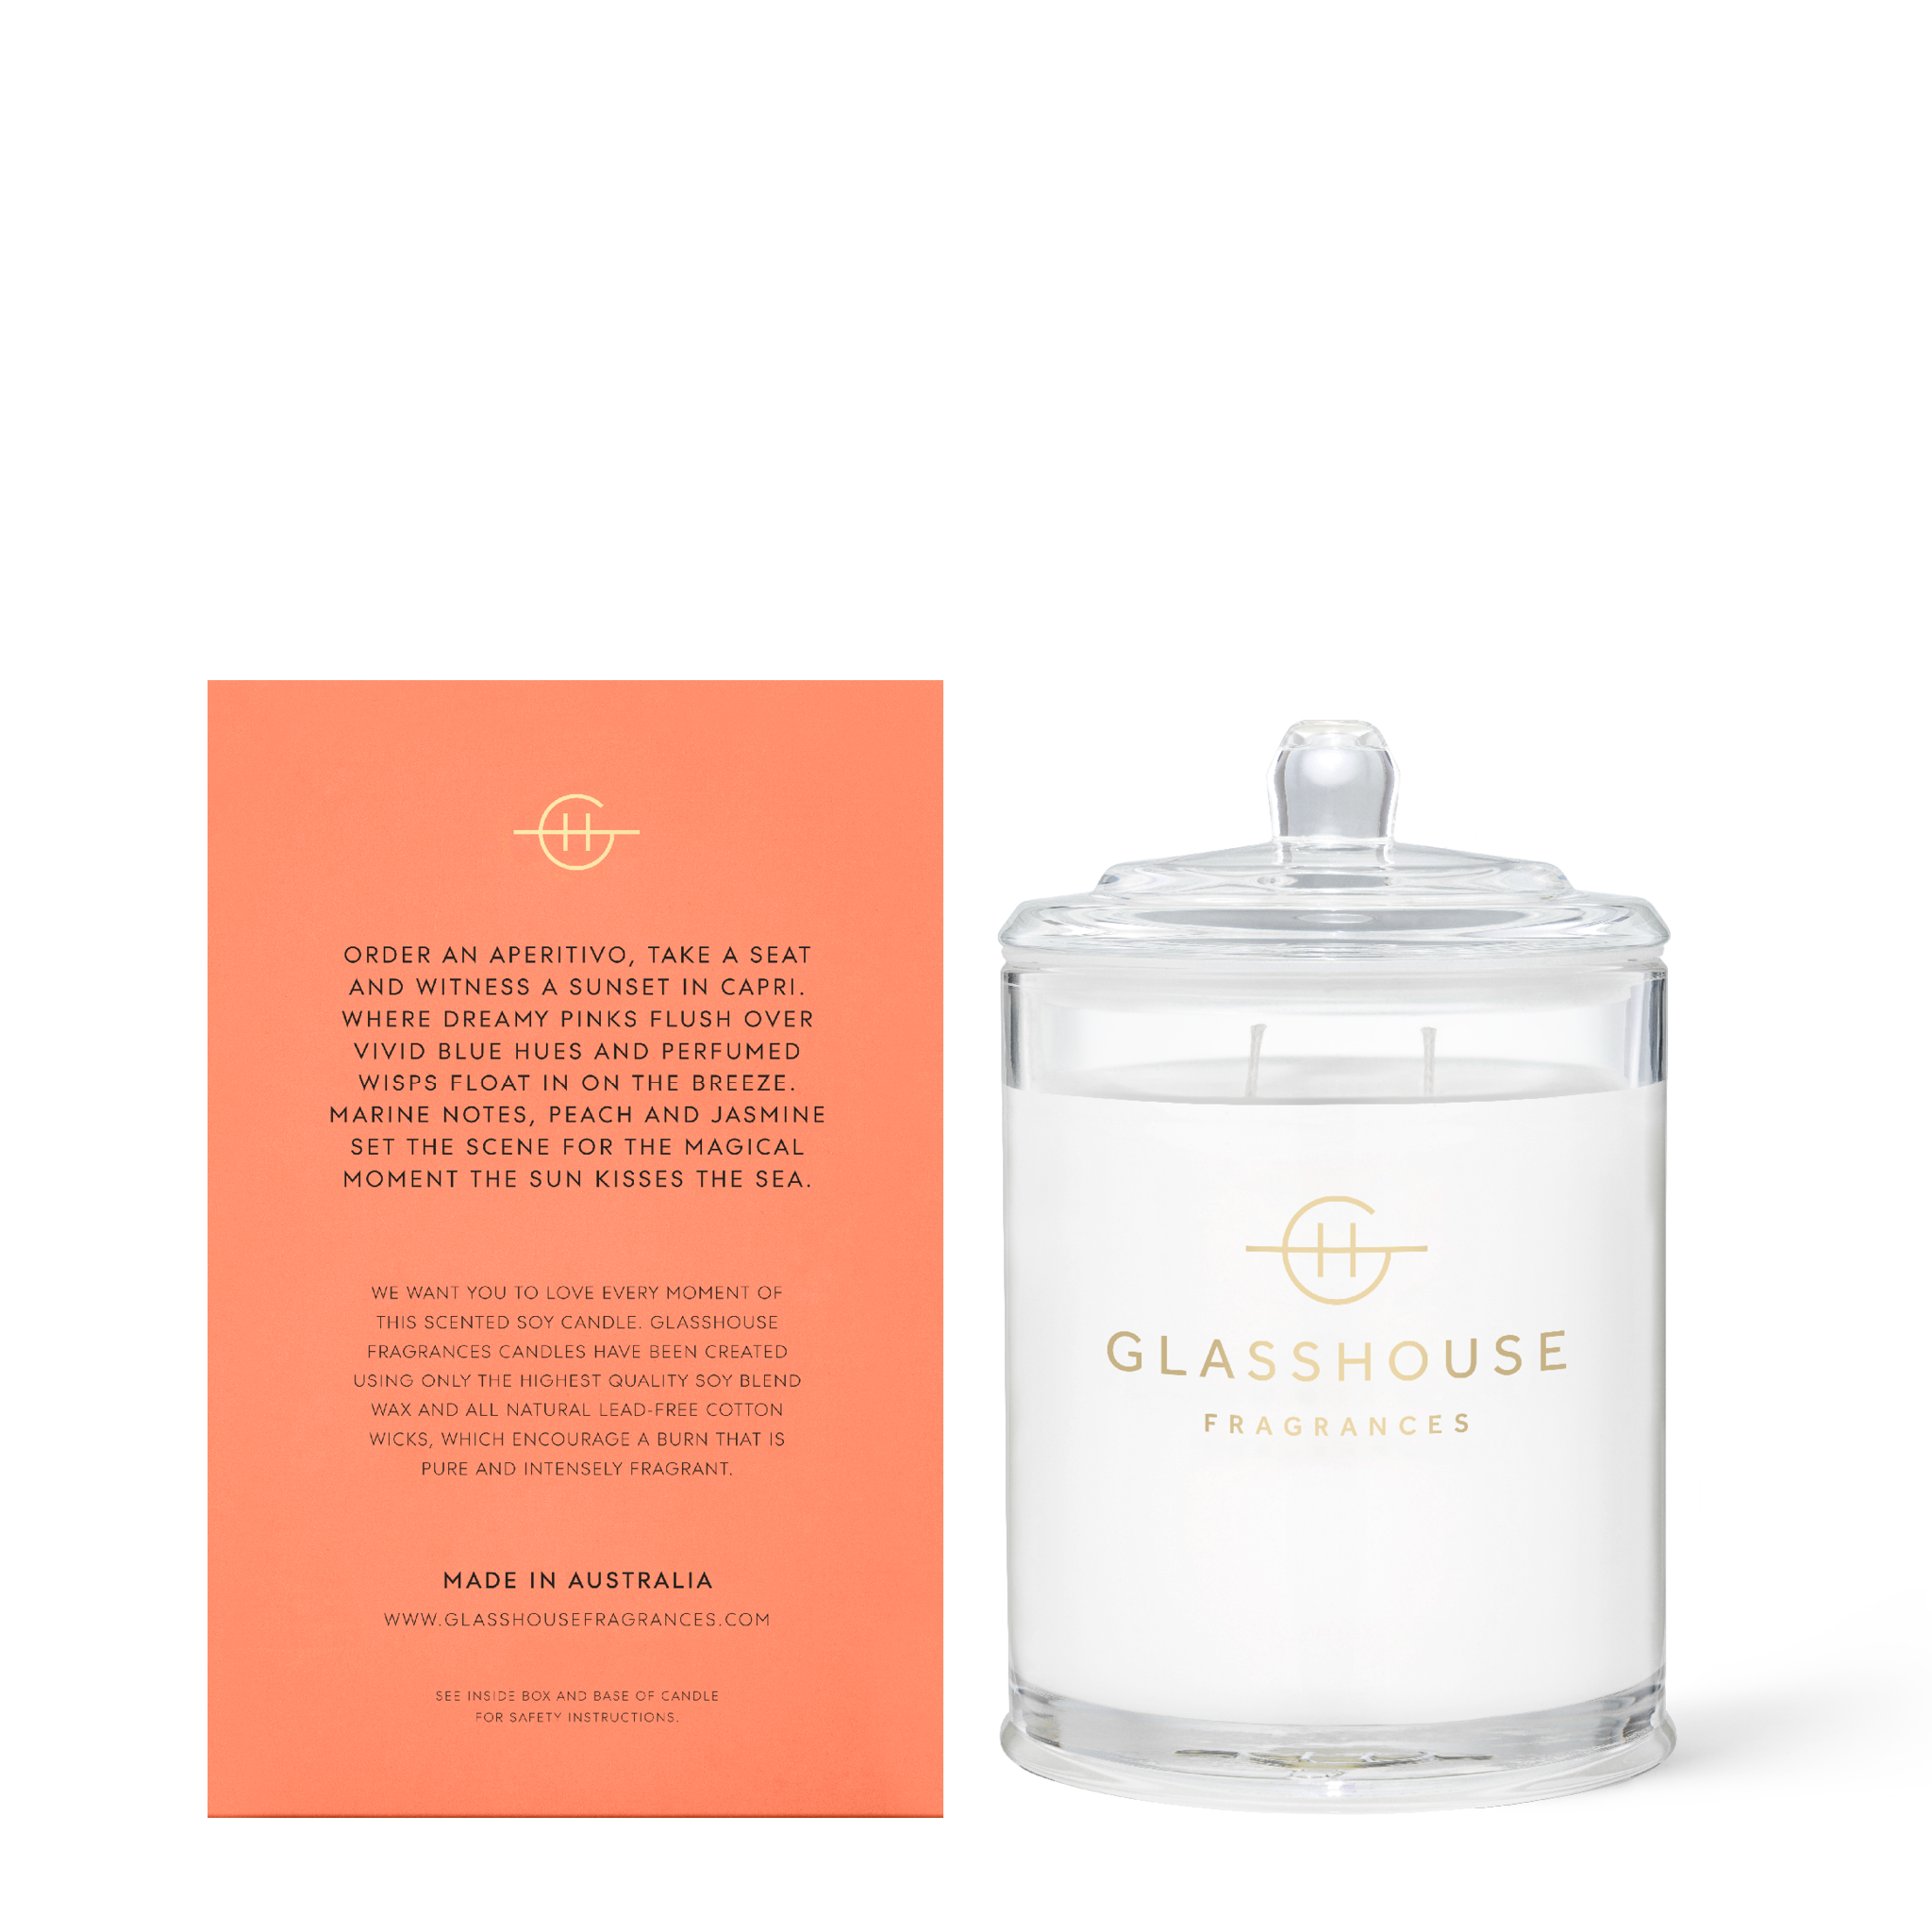 Glasshouse Fragrances Sunsets In Capri 380g Soy Candle back of product box